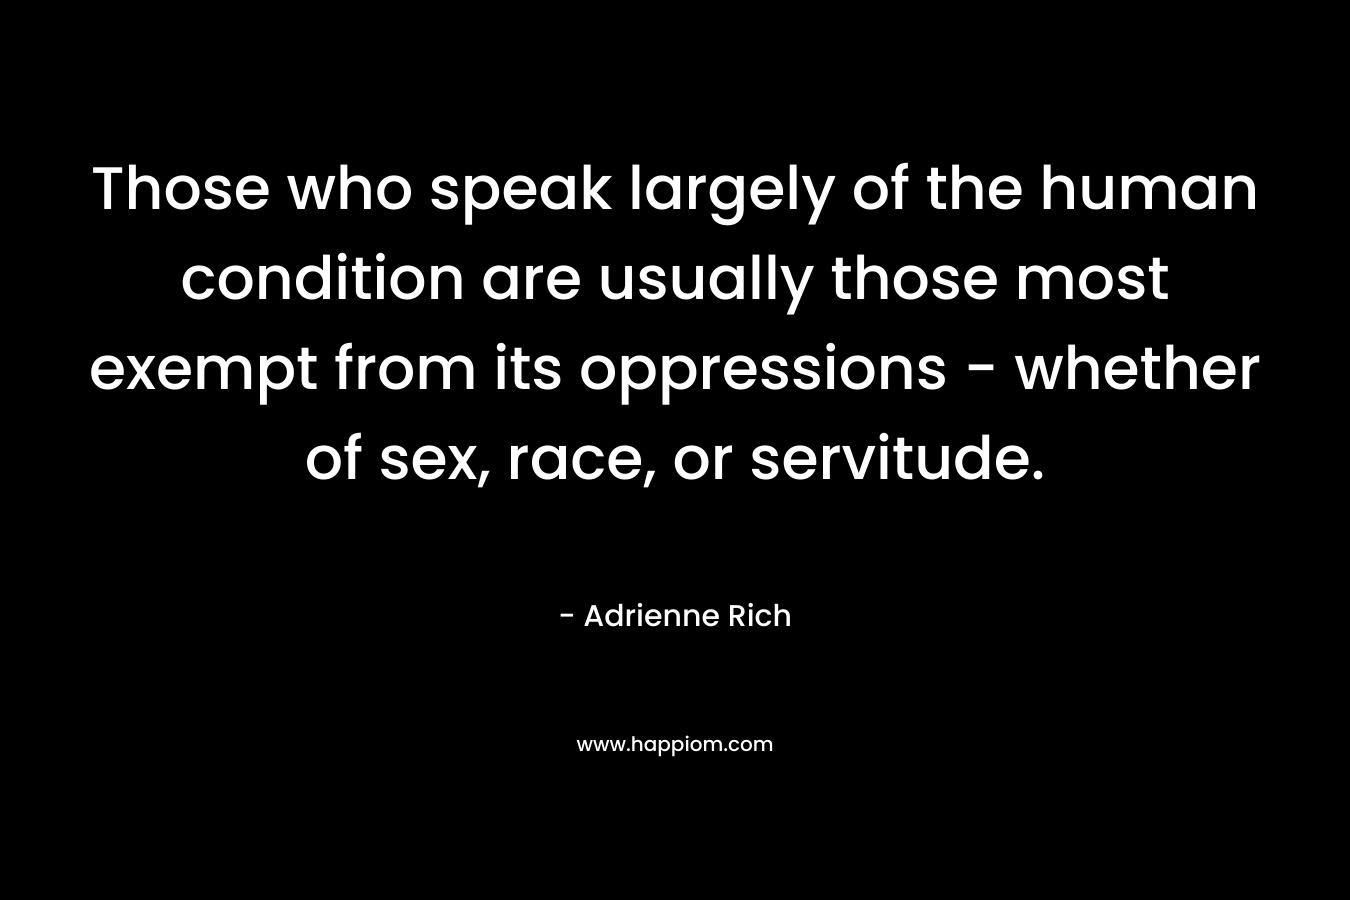 Those who speak largely of the human condition are usually those most exempt from its oppressions – whether of sex, race, or servitude. – Adrienne Rich